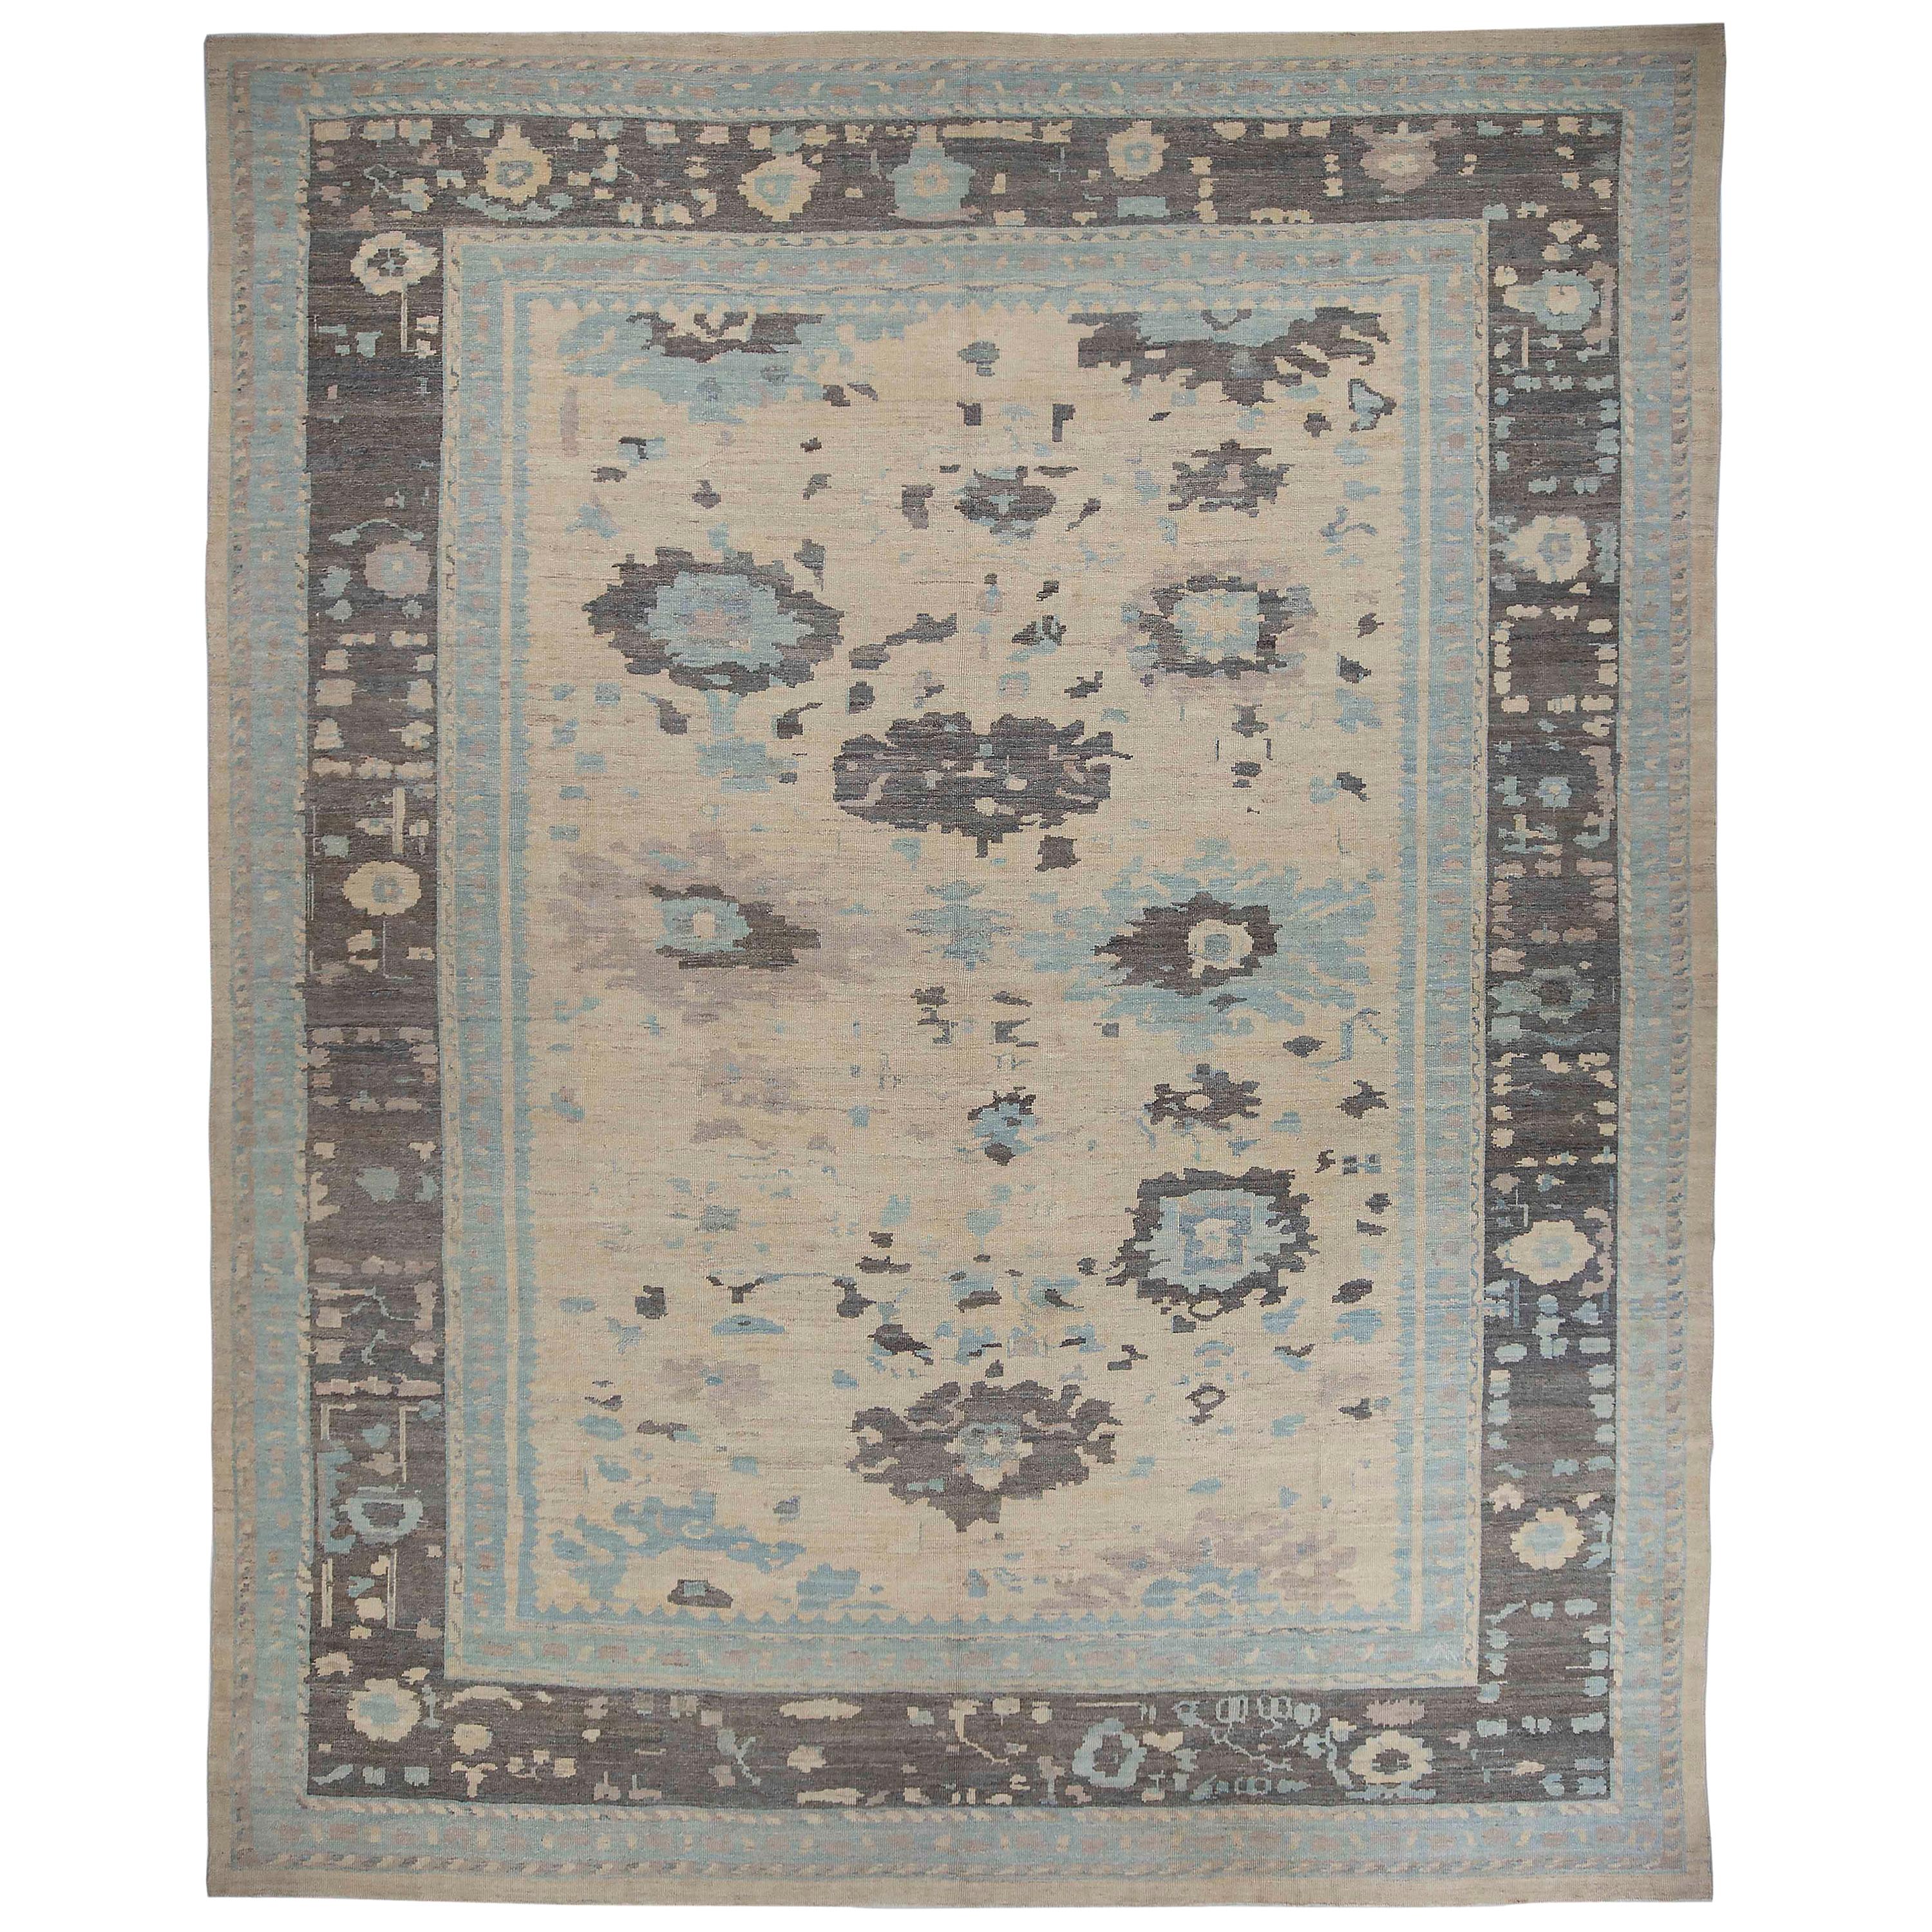 Persian Oushak Style Rug with Blue and Gray Floral Details on Beige Centerfield For Sale